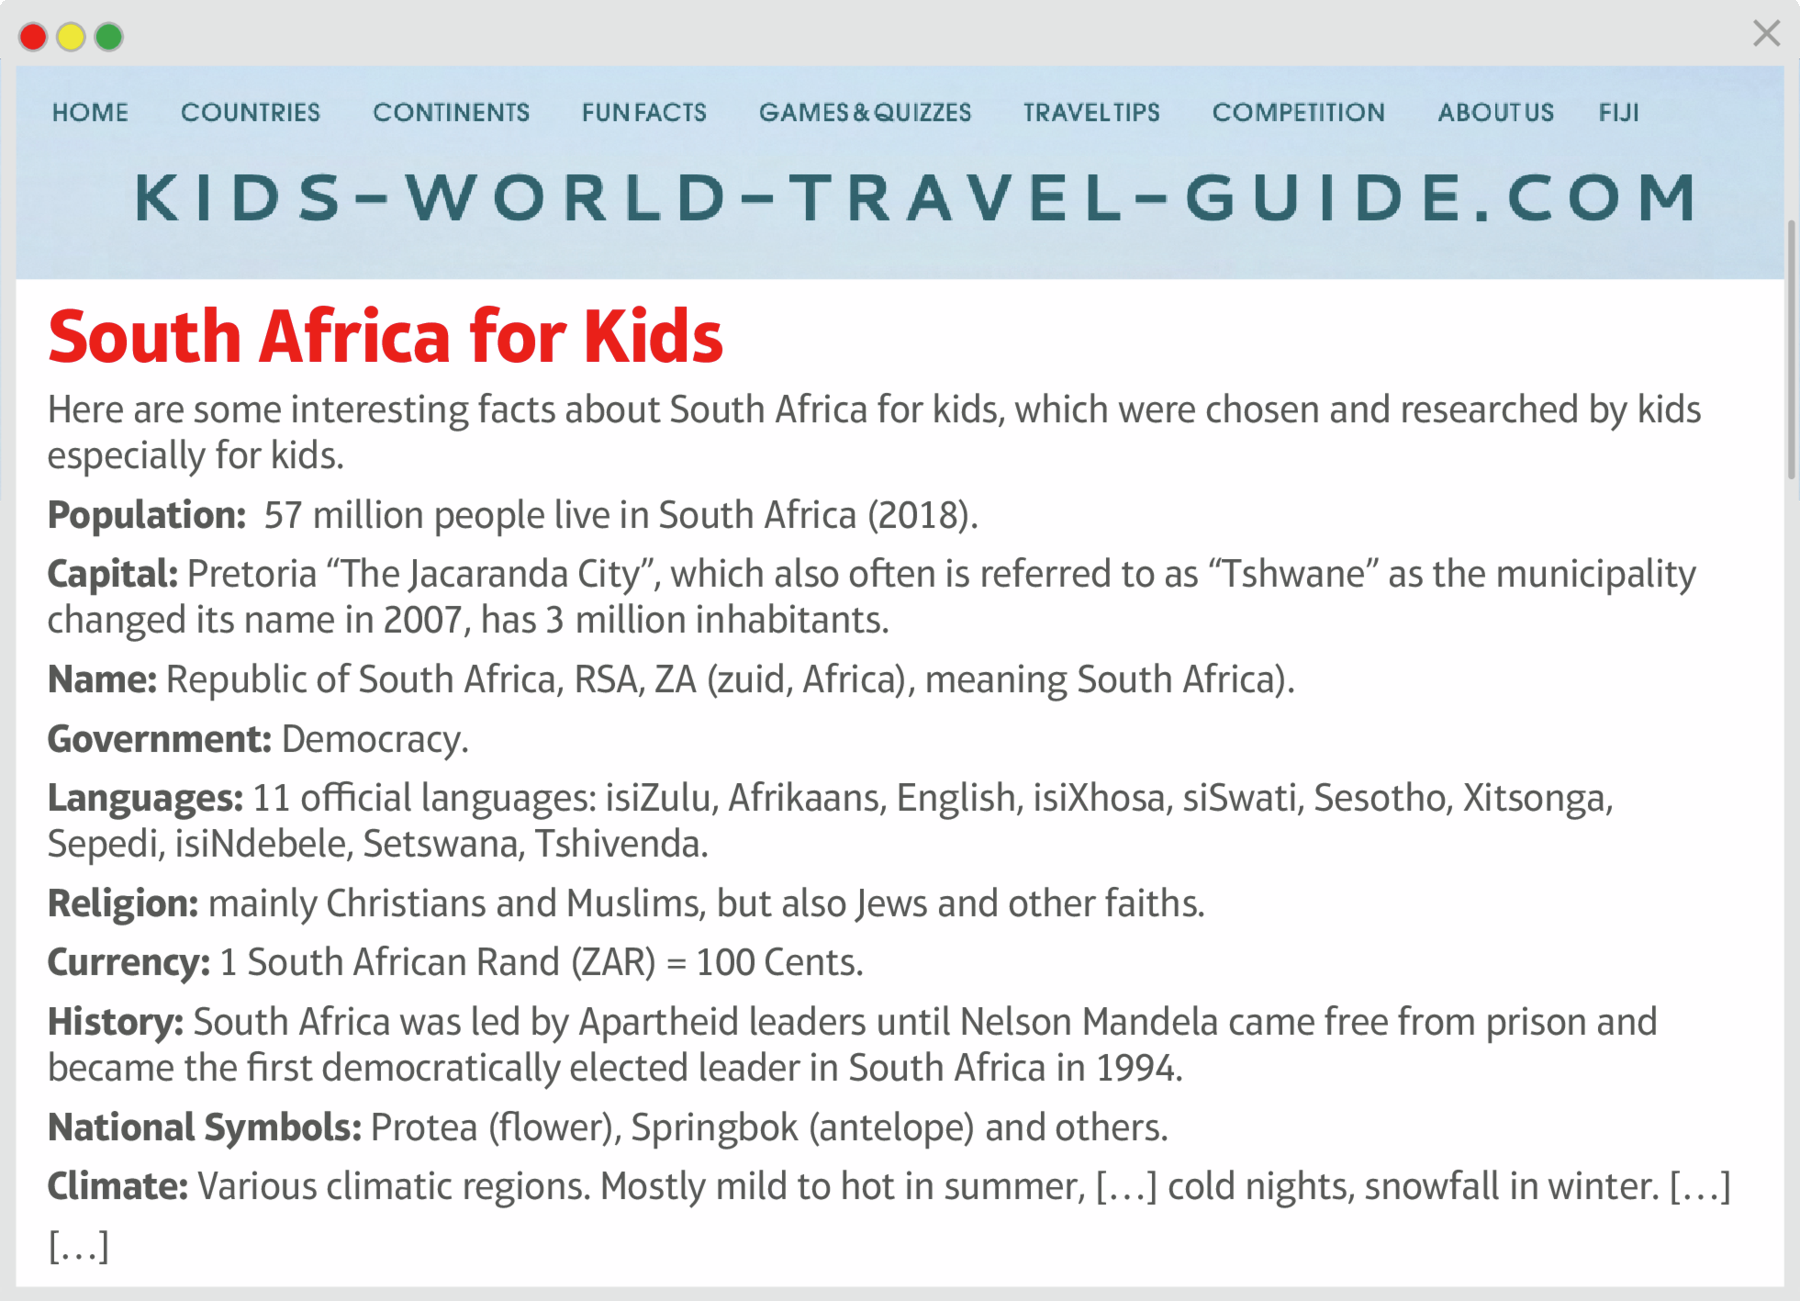 Reprodução de página da internet. No menu superior se lê os seguintes itens home, countries, continents, funfacts, games and quizzes, travel tips, competition, about e Fiji. Abaixo, se lê o título da página: KIDS WORLD TRAVEL GUIDE dot COM. Abaixo lê-se o título do teto em vermelho: South Africa for Kids. Em seguida, lê-se o texto: Here are some interesting facts about South Africa for kids, which were chosen and researched by kids especially for kids. Population: 57 million people live in South Africa (2018). Capital: Pretoria “The Jacaranda City”, which also o.en is referred to as “Tshwane” as the municipality changed its name in 2007, has 3 million inhabitants. Name: Republic of South Africa, RSA, ZA (zuid, Africa), meaning South Africa). Government: Democracy. Languages: 11 o.cial languages: isiZulu, Afrikaans, English, isiXhosa, siSwati, Sesotho, Xitsonga, Sepedi, isiNdebele, Setswana, Tshivenda. Religion: mainly Christians and Muslims, but also Jews and other faiths. Currency: 1 South African Rand (ZAR) = 100 Cents. History: South Africa was led by Apartheid leaders until Nelson Mandela came free from prison and became the first democratically elected leader in South Africa in 1994. National Symbols: Protea (flower), Springbok (antelope) and others. Climate: Various climatic regions. Mostly mild to hot in summer, [marca de supressão] cold nights, snowfall in winter. [marca de supressão]